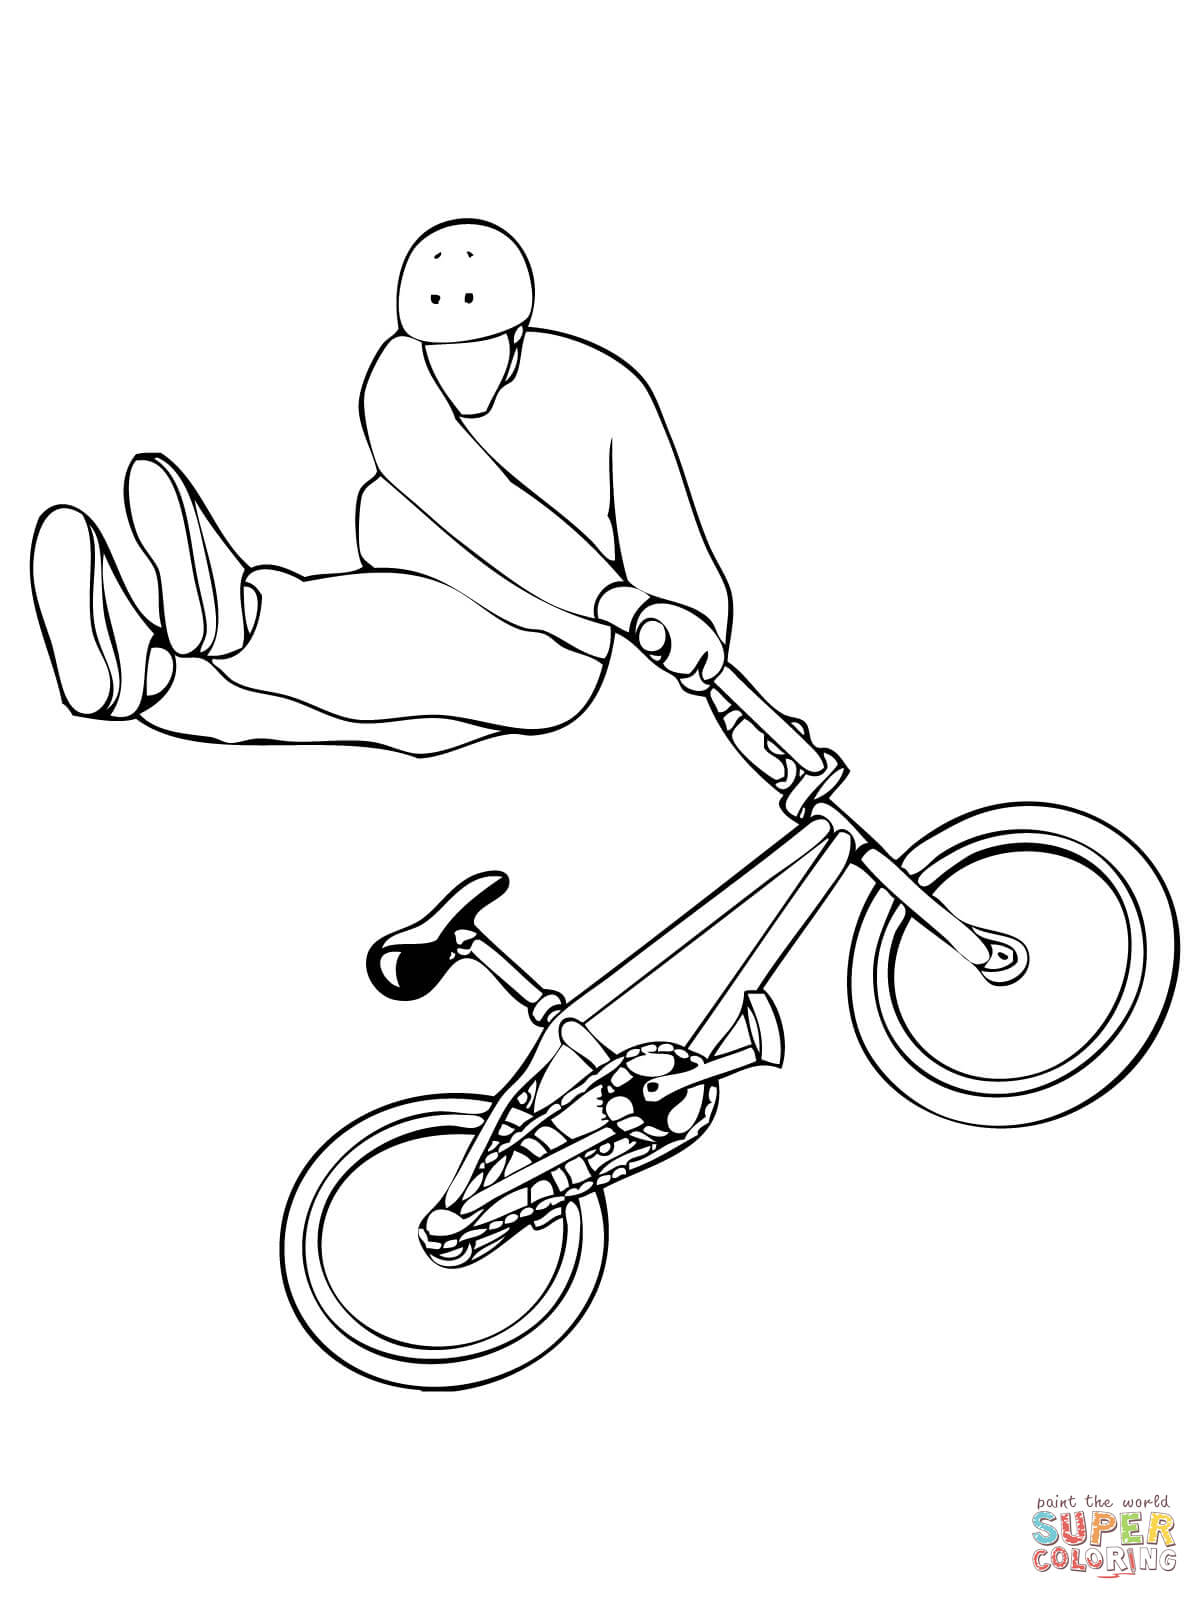 BMX Biker coloring page | Free Printable Coloring Pages